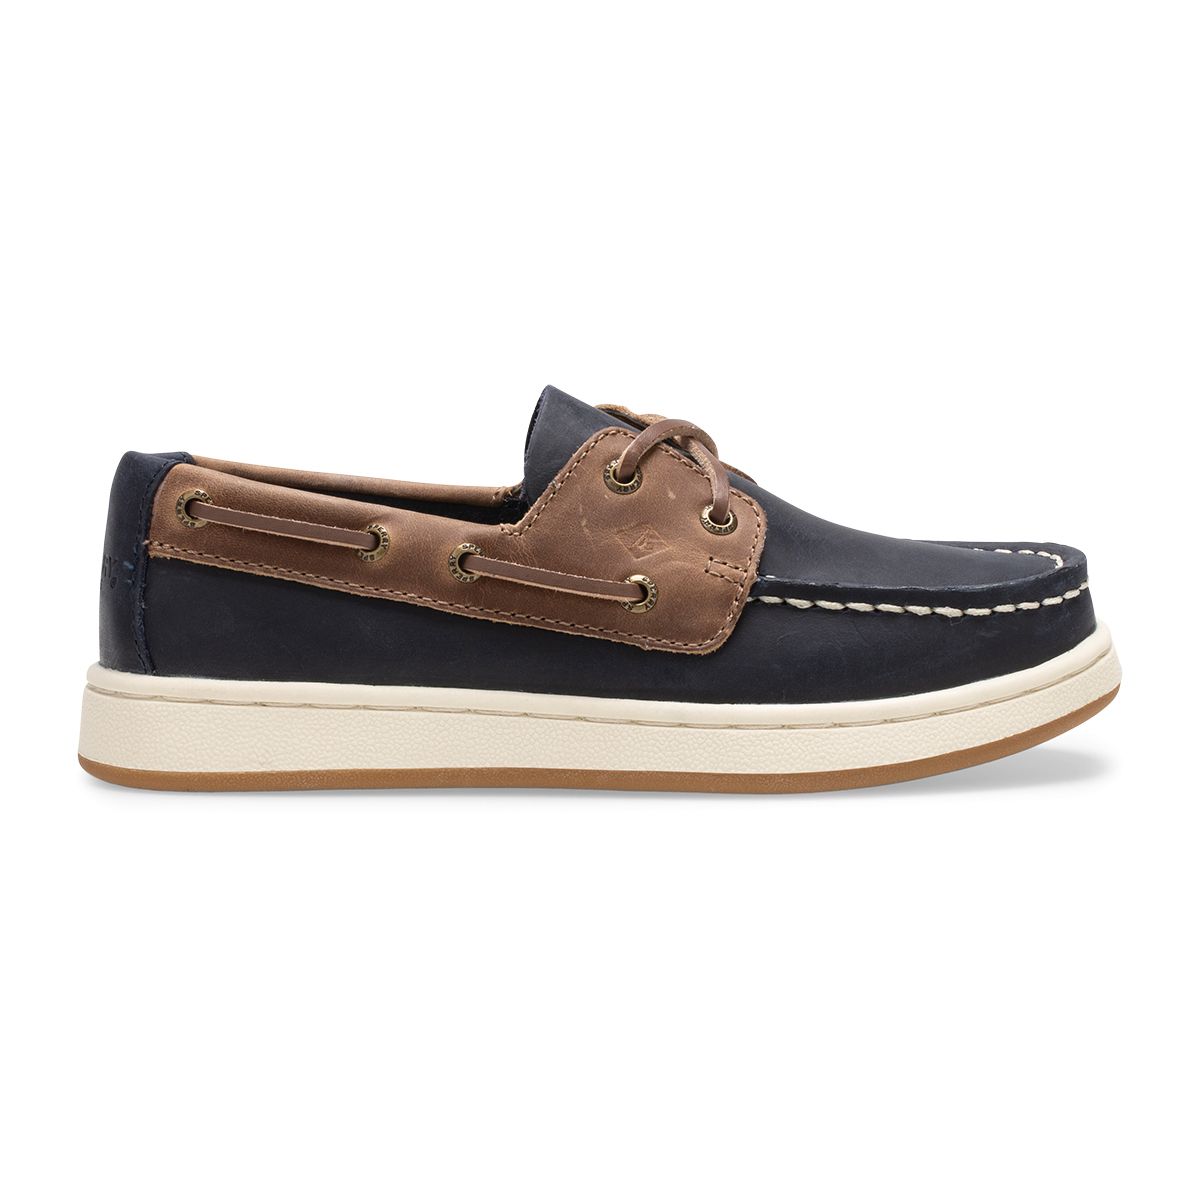 Sperry Kids Flash Sales, 59% OFF | www.ilpungolo.org